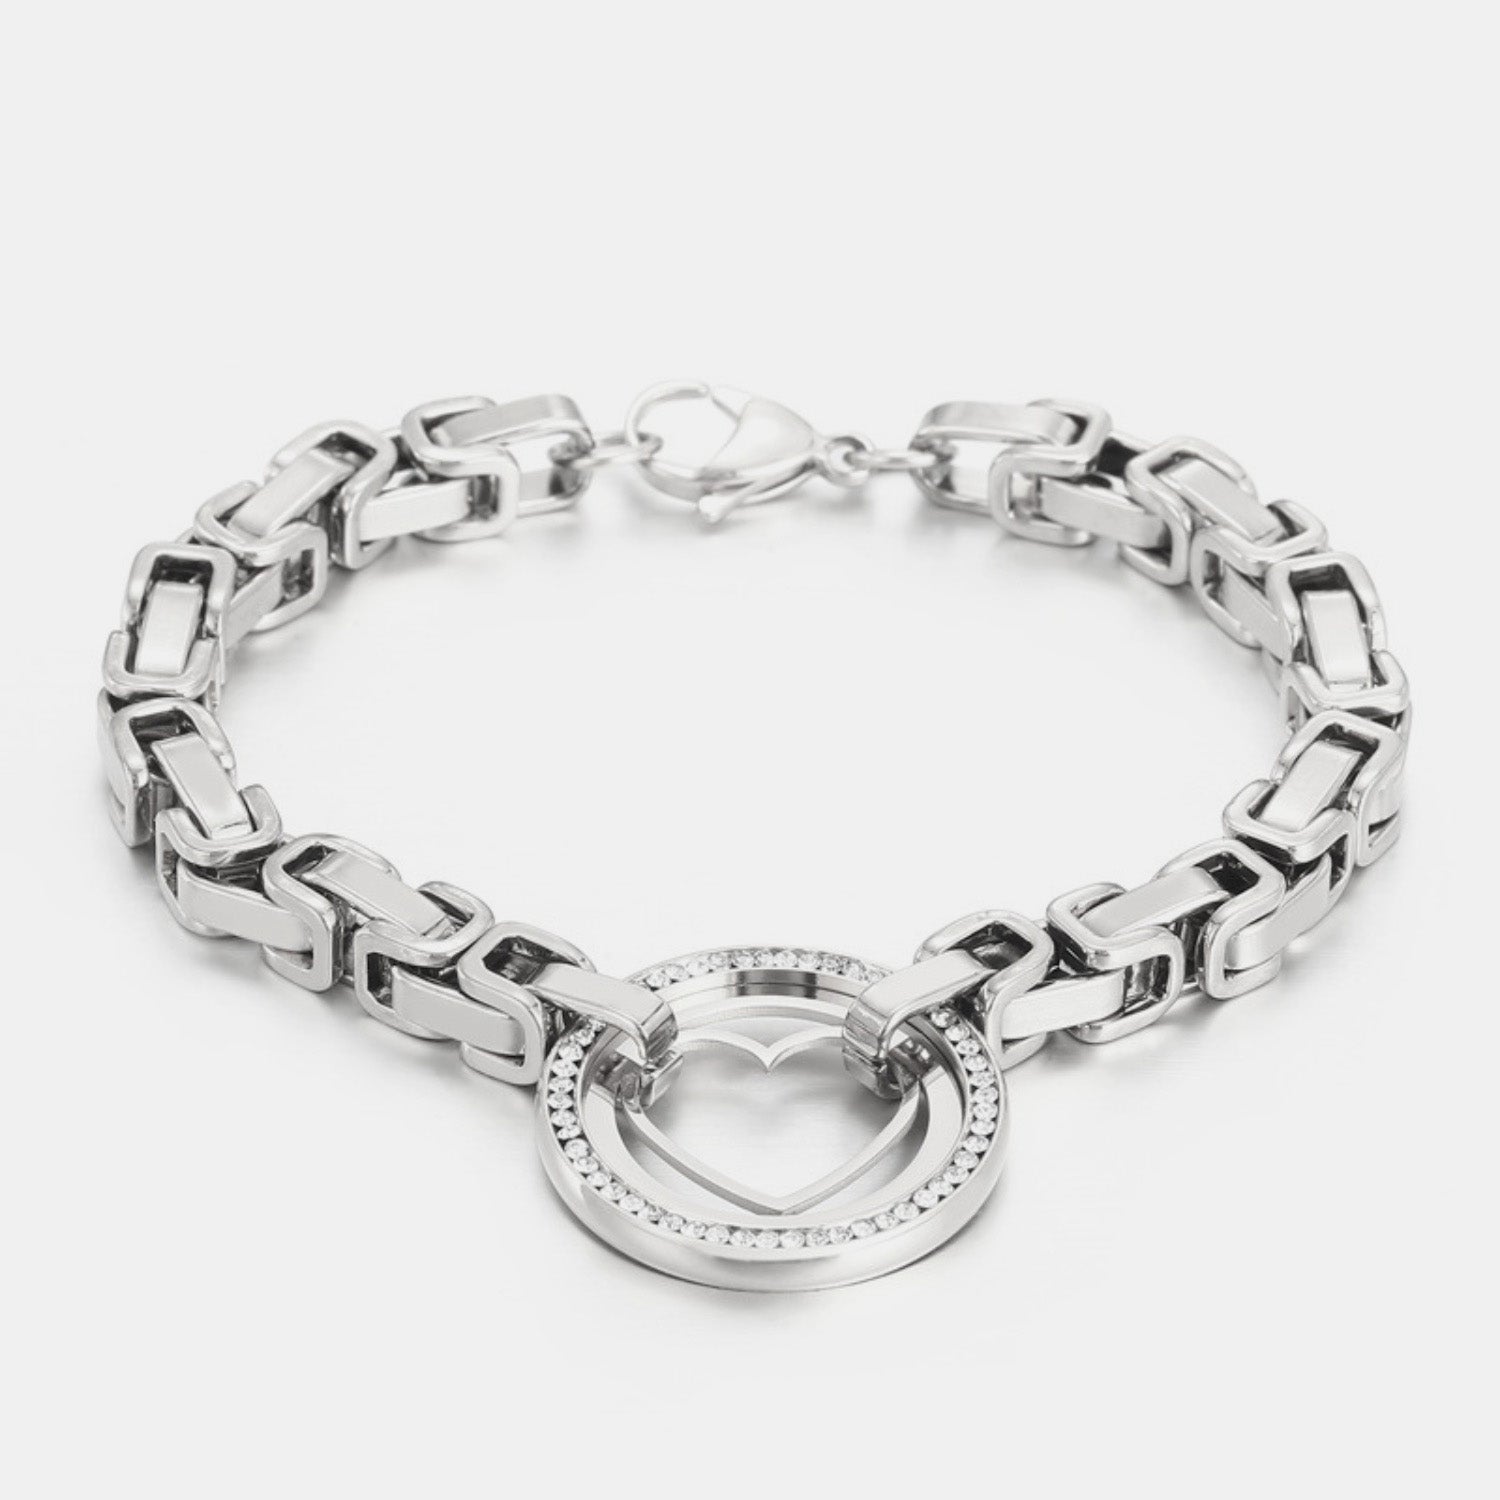 Stainless Steel Inlaid Zircon Cutout Heart Bracelet - Tophatter Deals and Online Shopping - Electronics, Jewelry, Beauty, Health, Gadgets, Fashion - Tophatter's Discounts & Offers - tophatters - tophatters.co